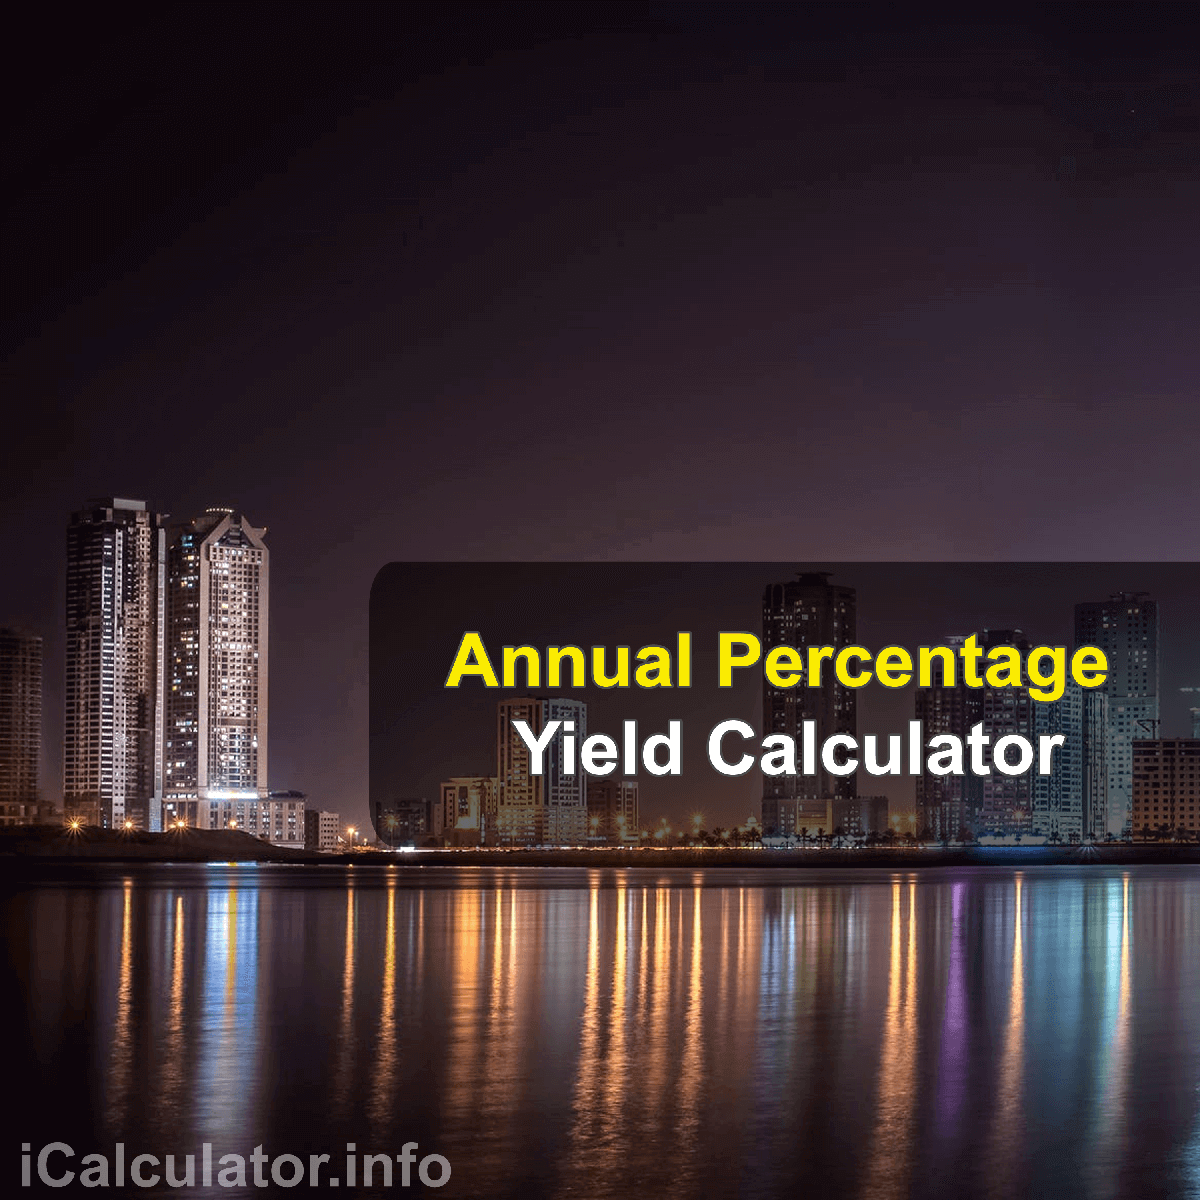 Annual Percentage Yield Calculator. This image provides details of how to calculate Annual Percentage Yield using a calculator and notepad. By using the Annual Percentage Yield formula, the Annual Percentage Yield Calculator provides a true calculation of the amount of money that can be earned with compound interest, the APY will let us know the amount of money earned on the original deposit as well as the interest which is earned